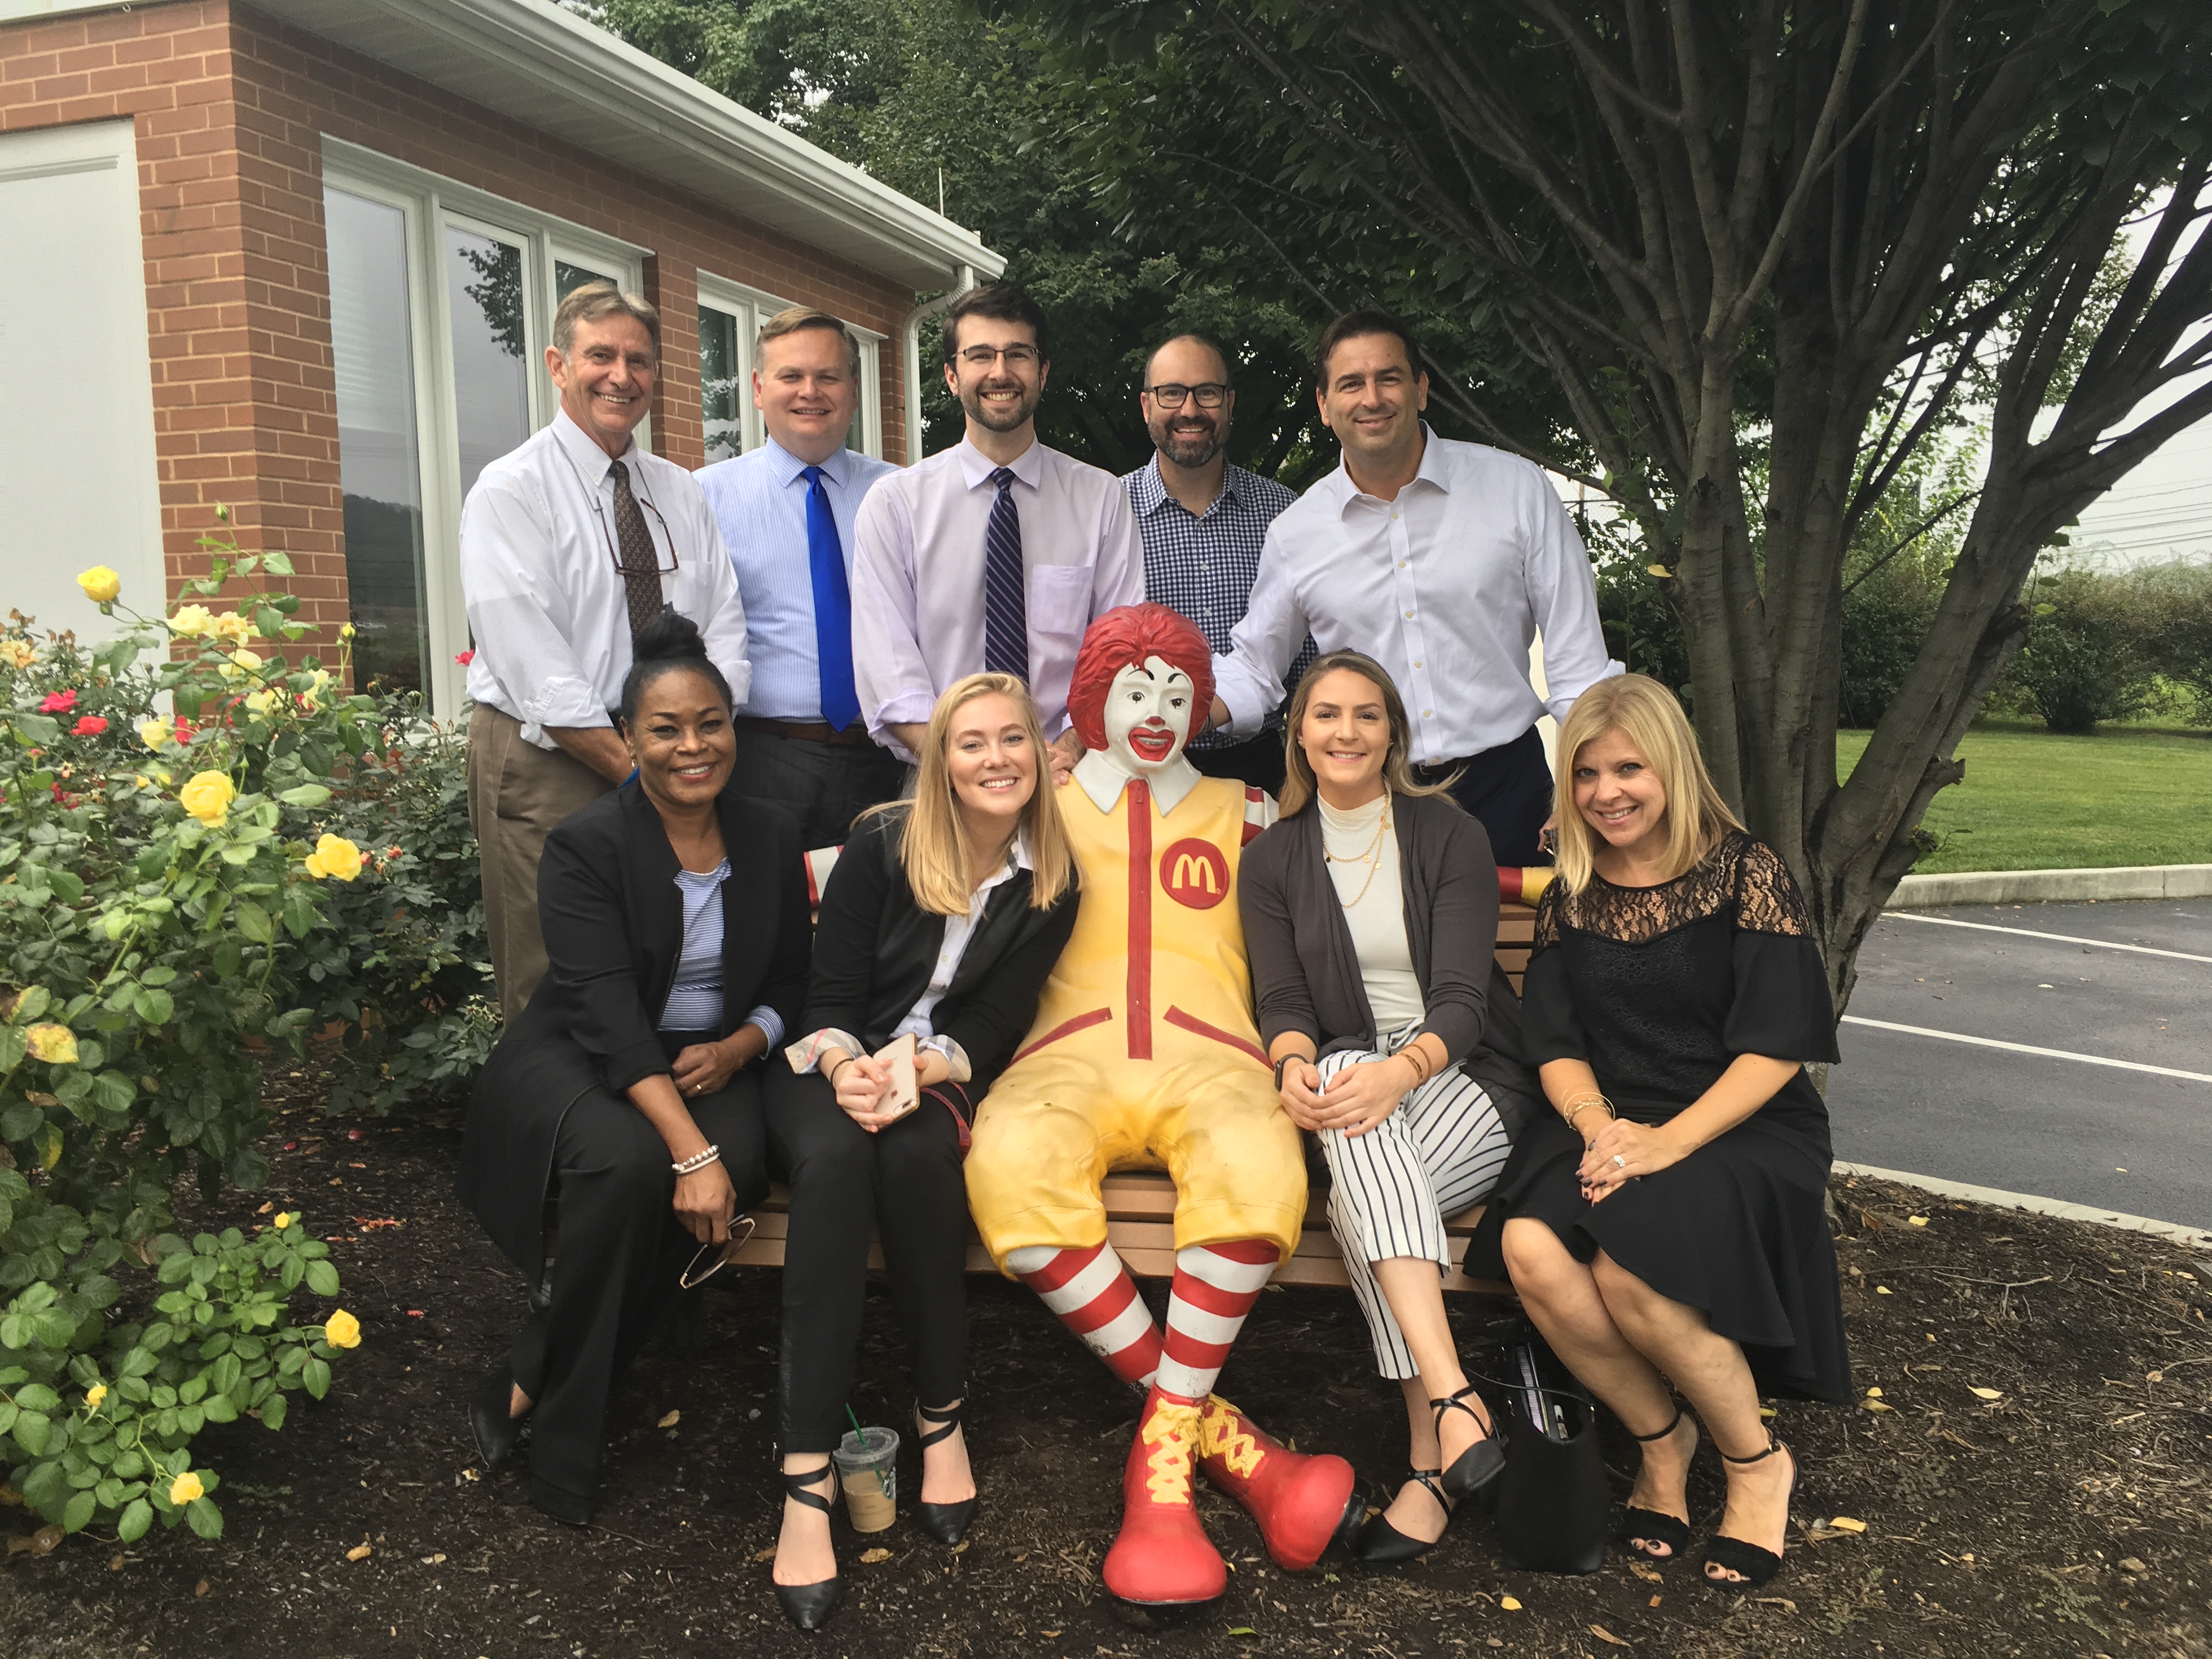 The Ronald McDonald House of Central PA, Hershey, PA